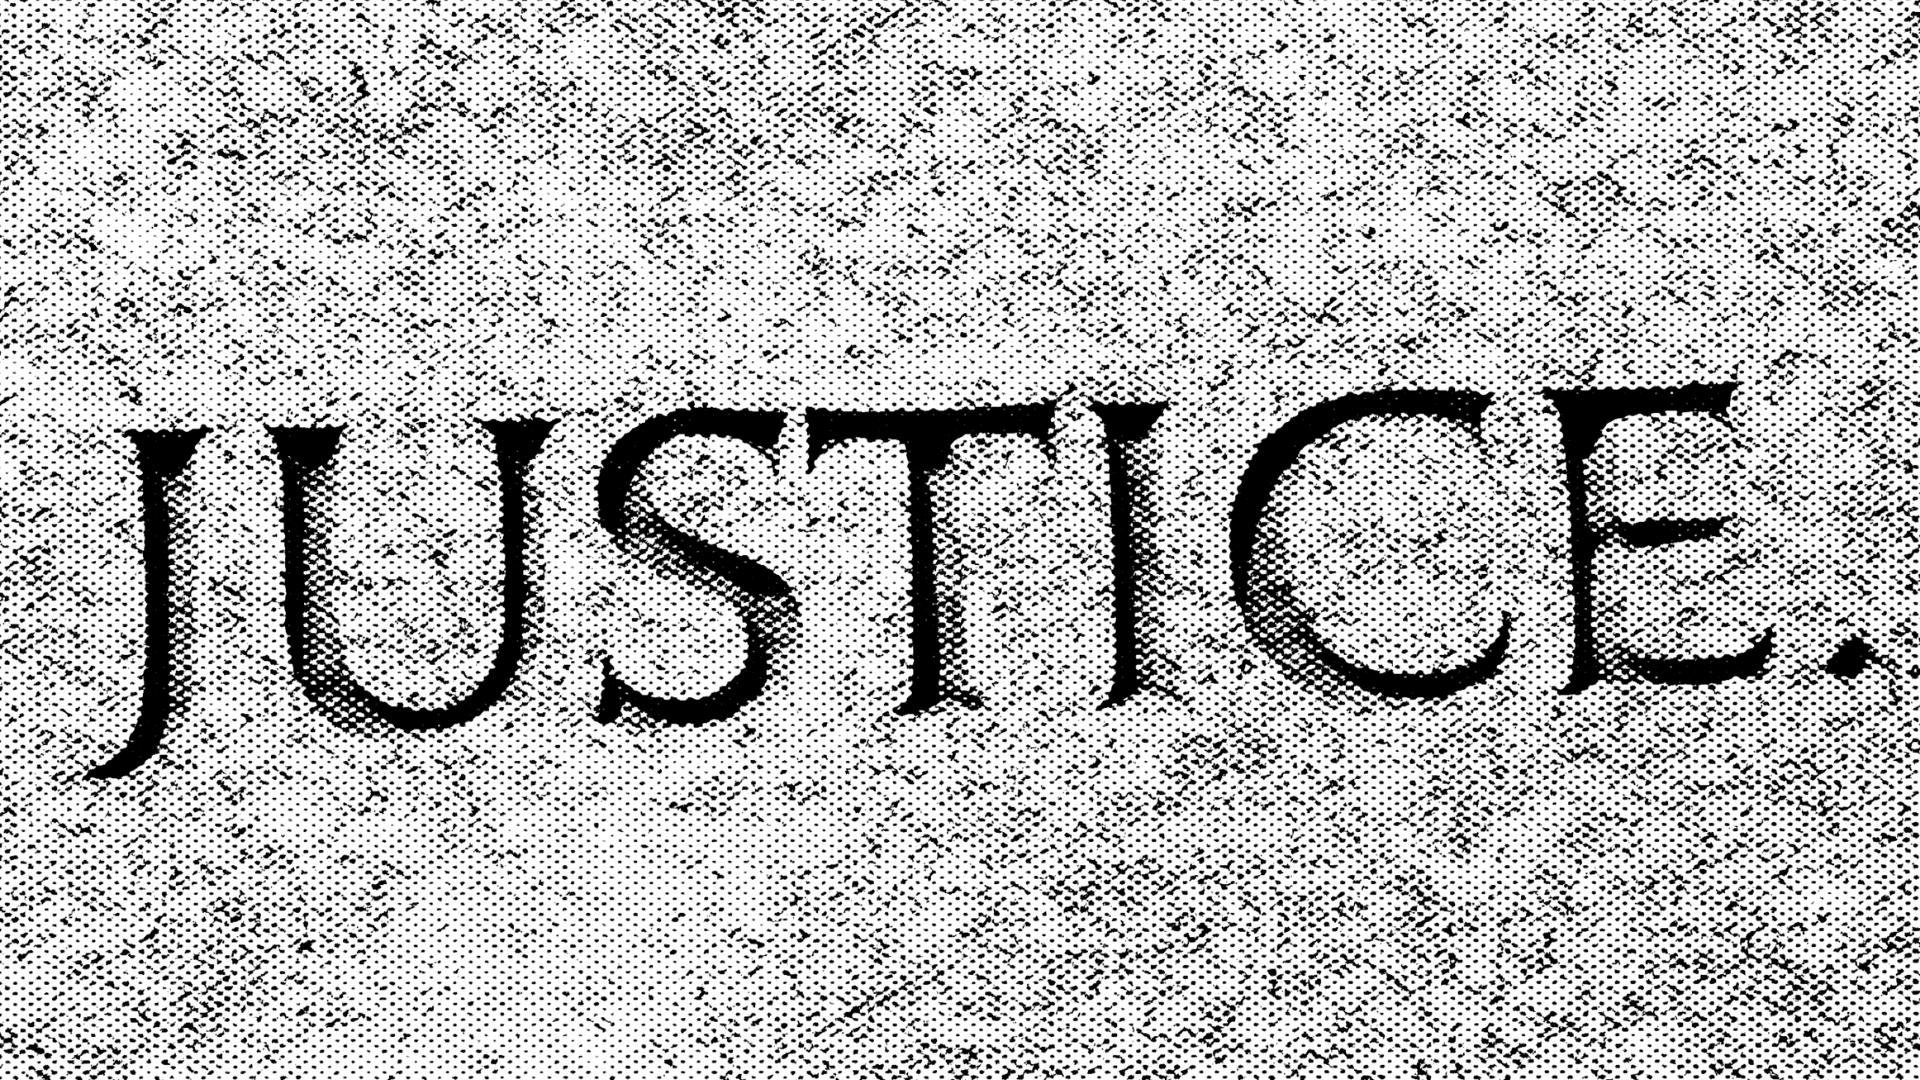 Justice: Yesterday, Today & Tomorrow